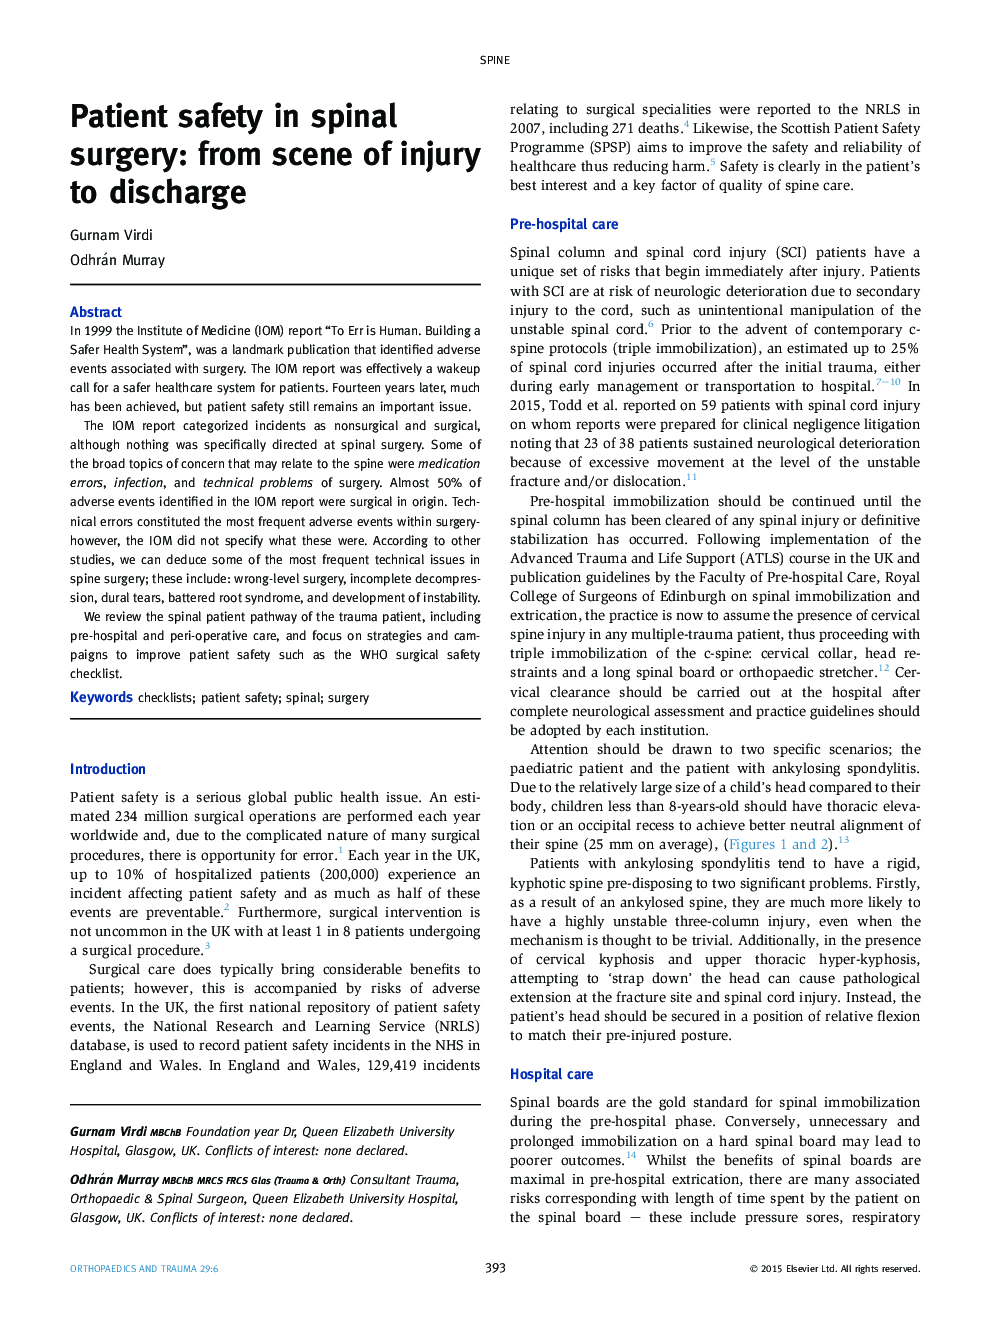 Patient safety in spinal surgery: from scene of injury to discharge